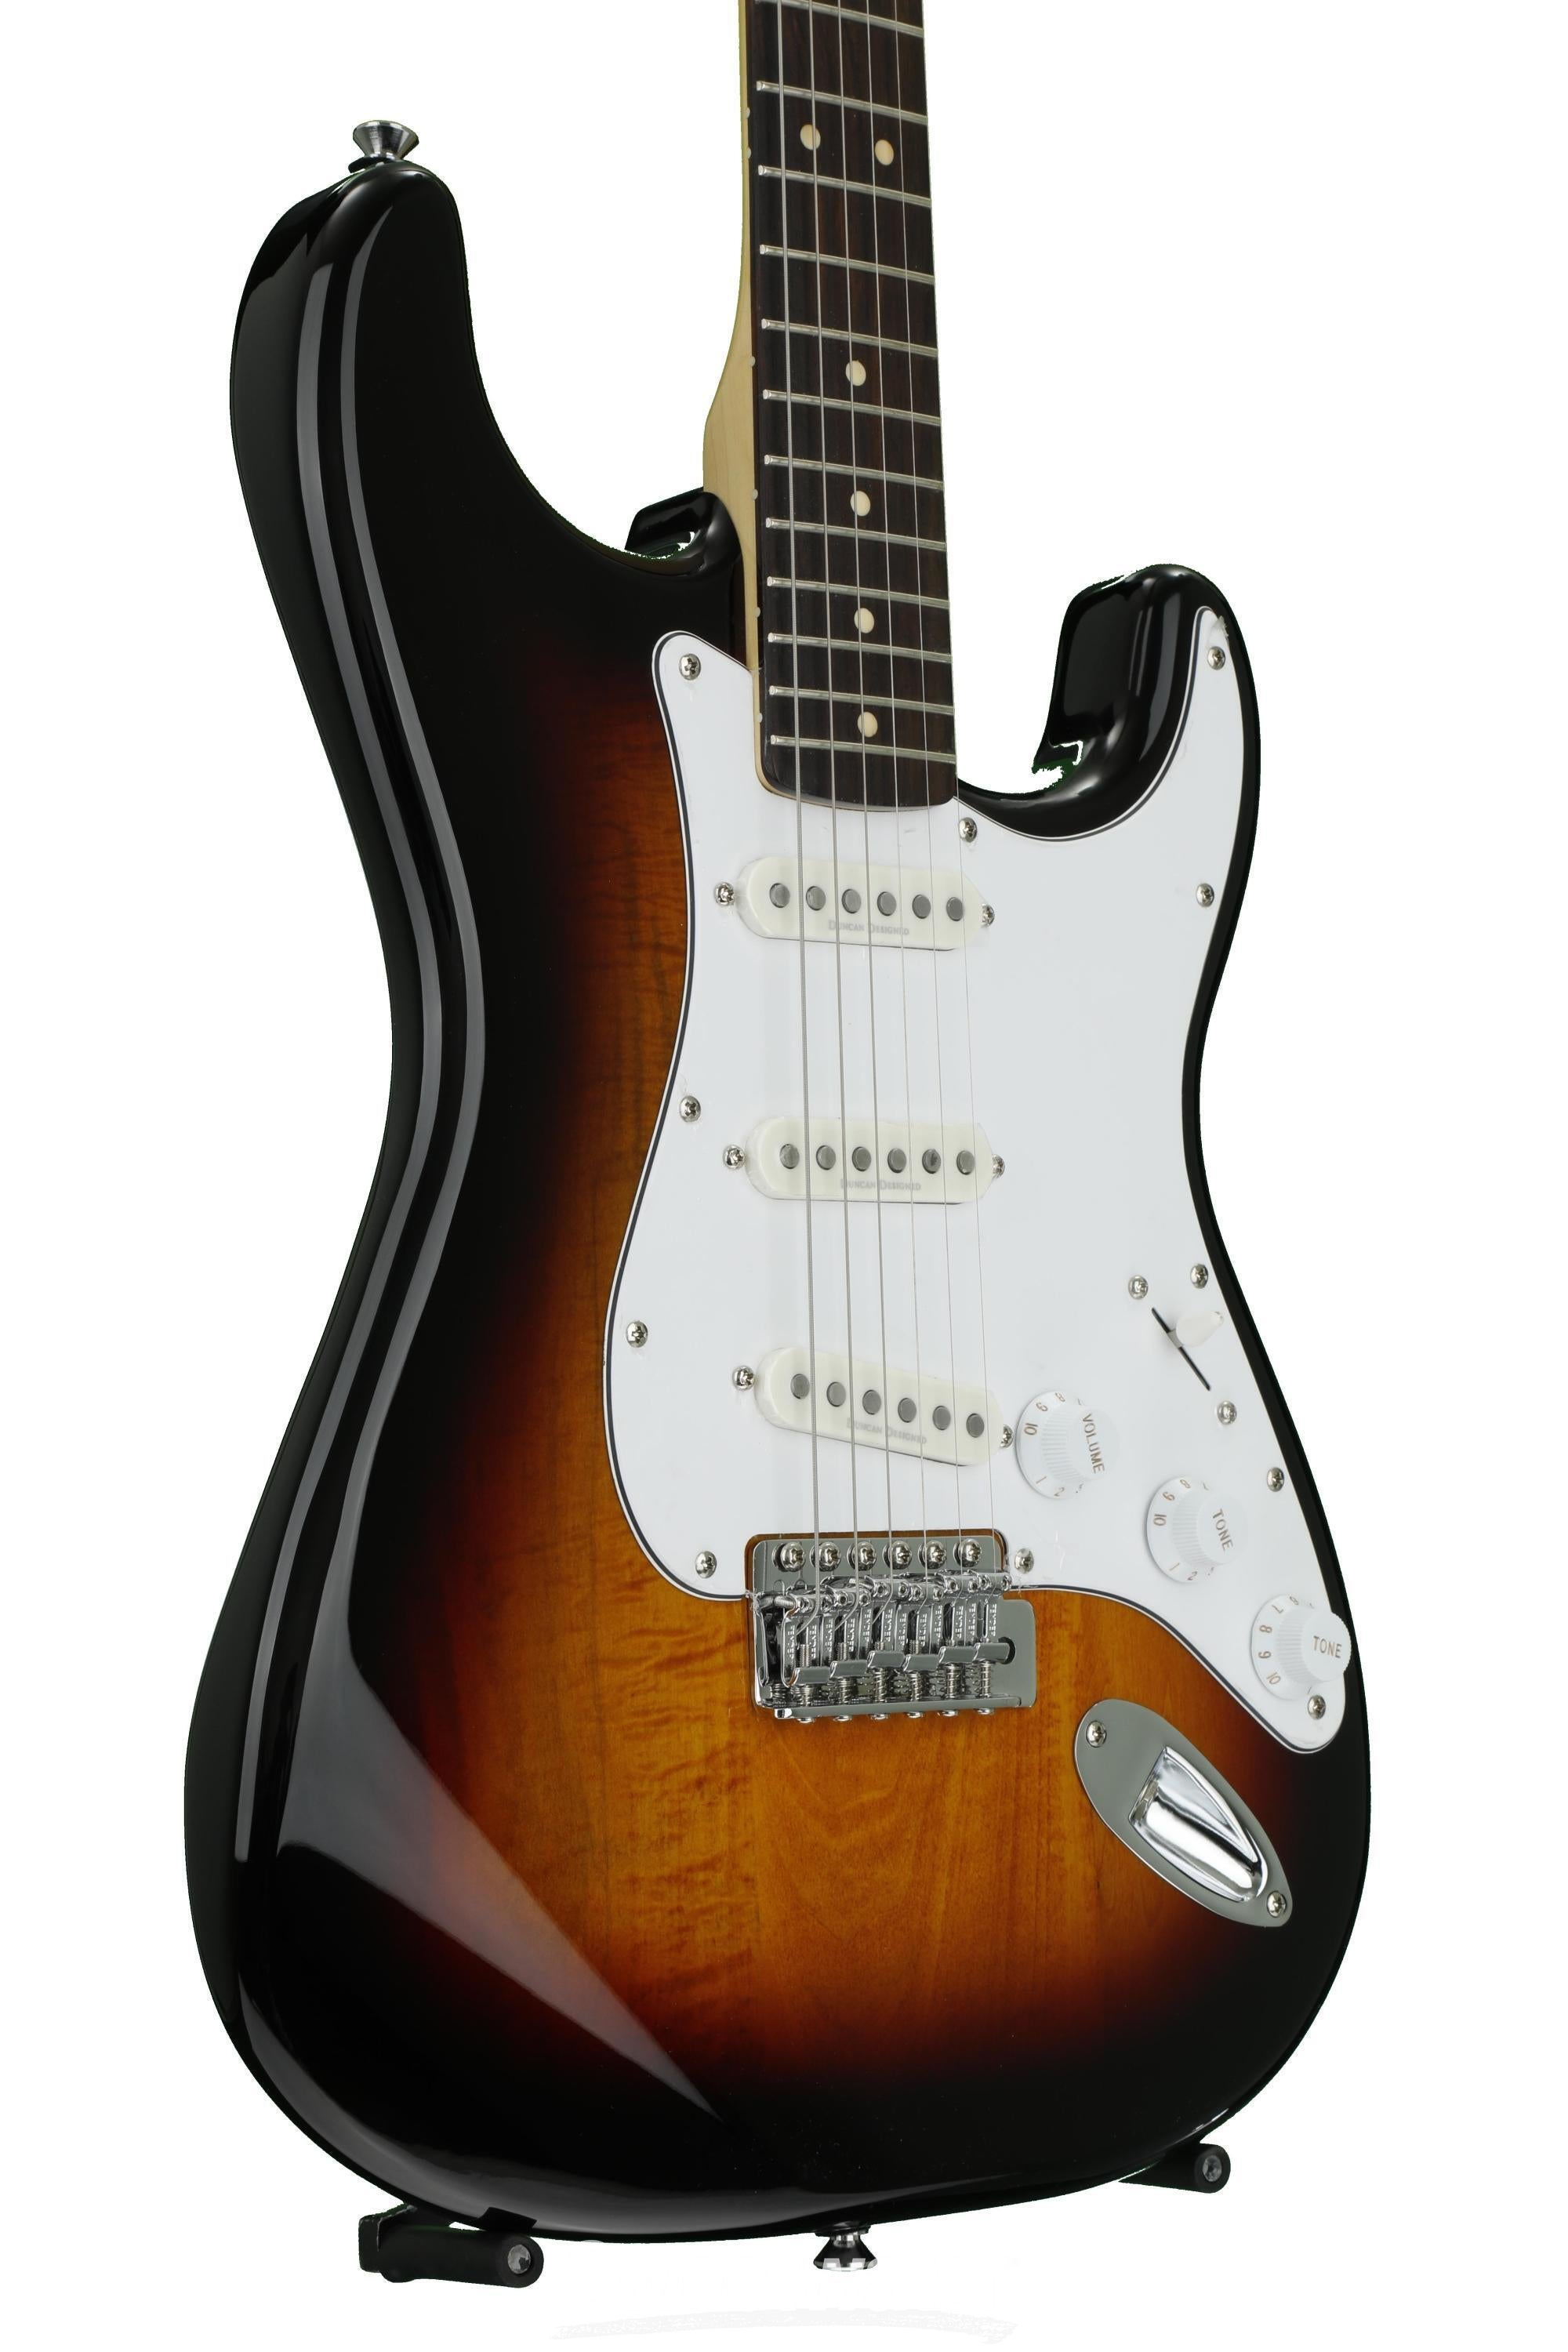 Squier Vintage Modified Stratocaster - 3-tone Sunburst | Sweetwater